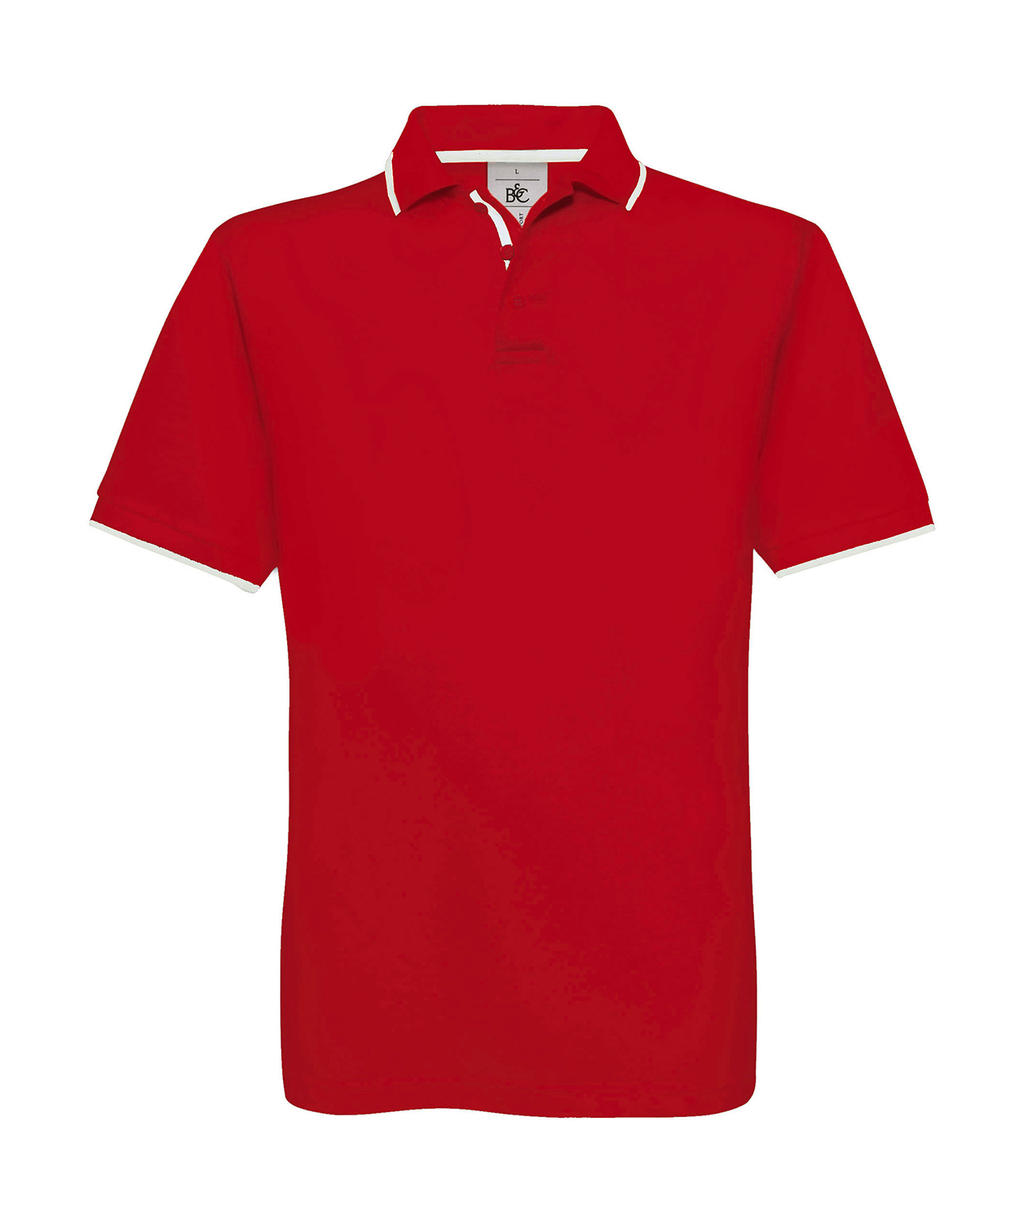  Safran Sport Tipped Polo in Farbe Red/White